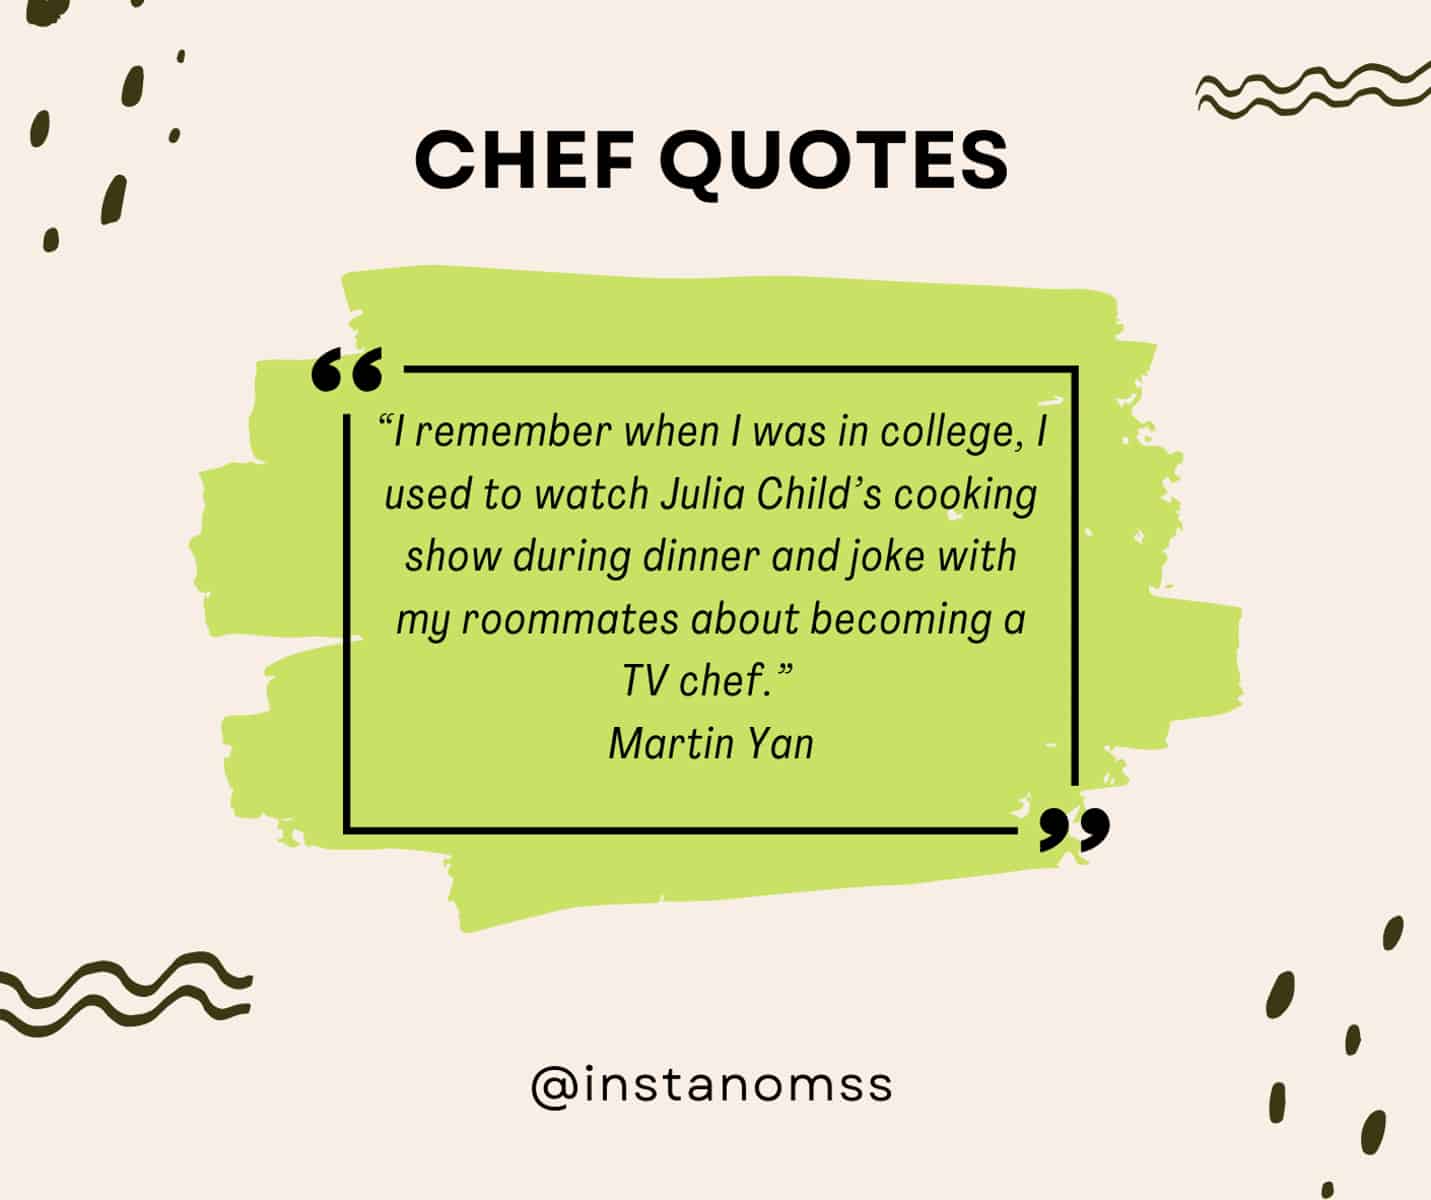 “I remember when I was in college, I used to watch Julia Child’s cooking show during dinner and joke with my roommates about becoming a TV chef.” Martin Yan